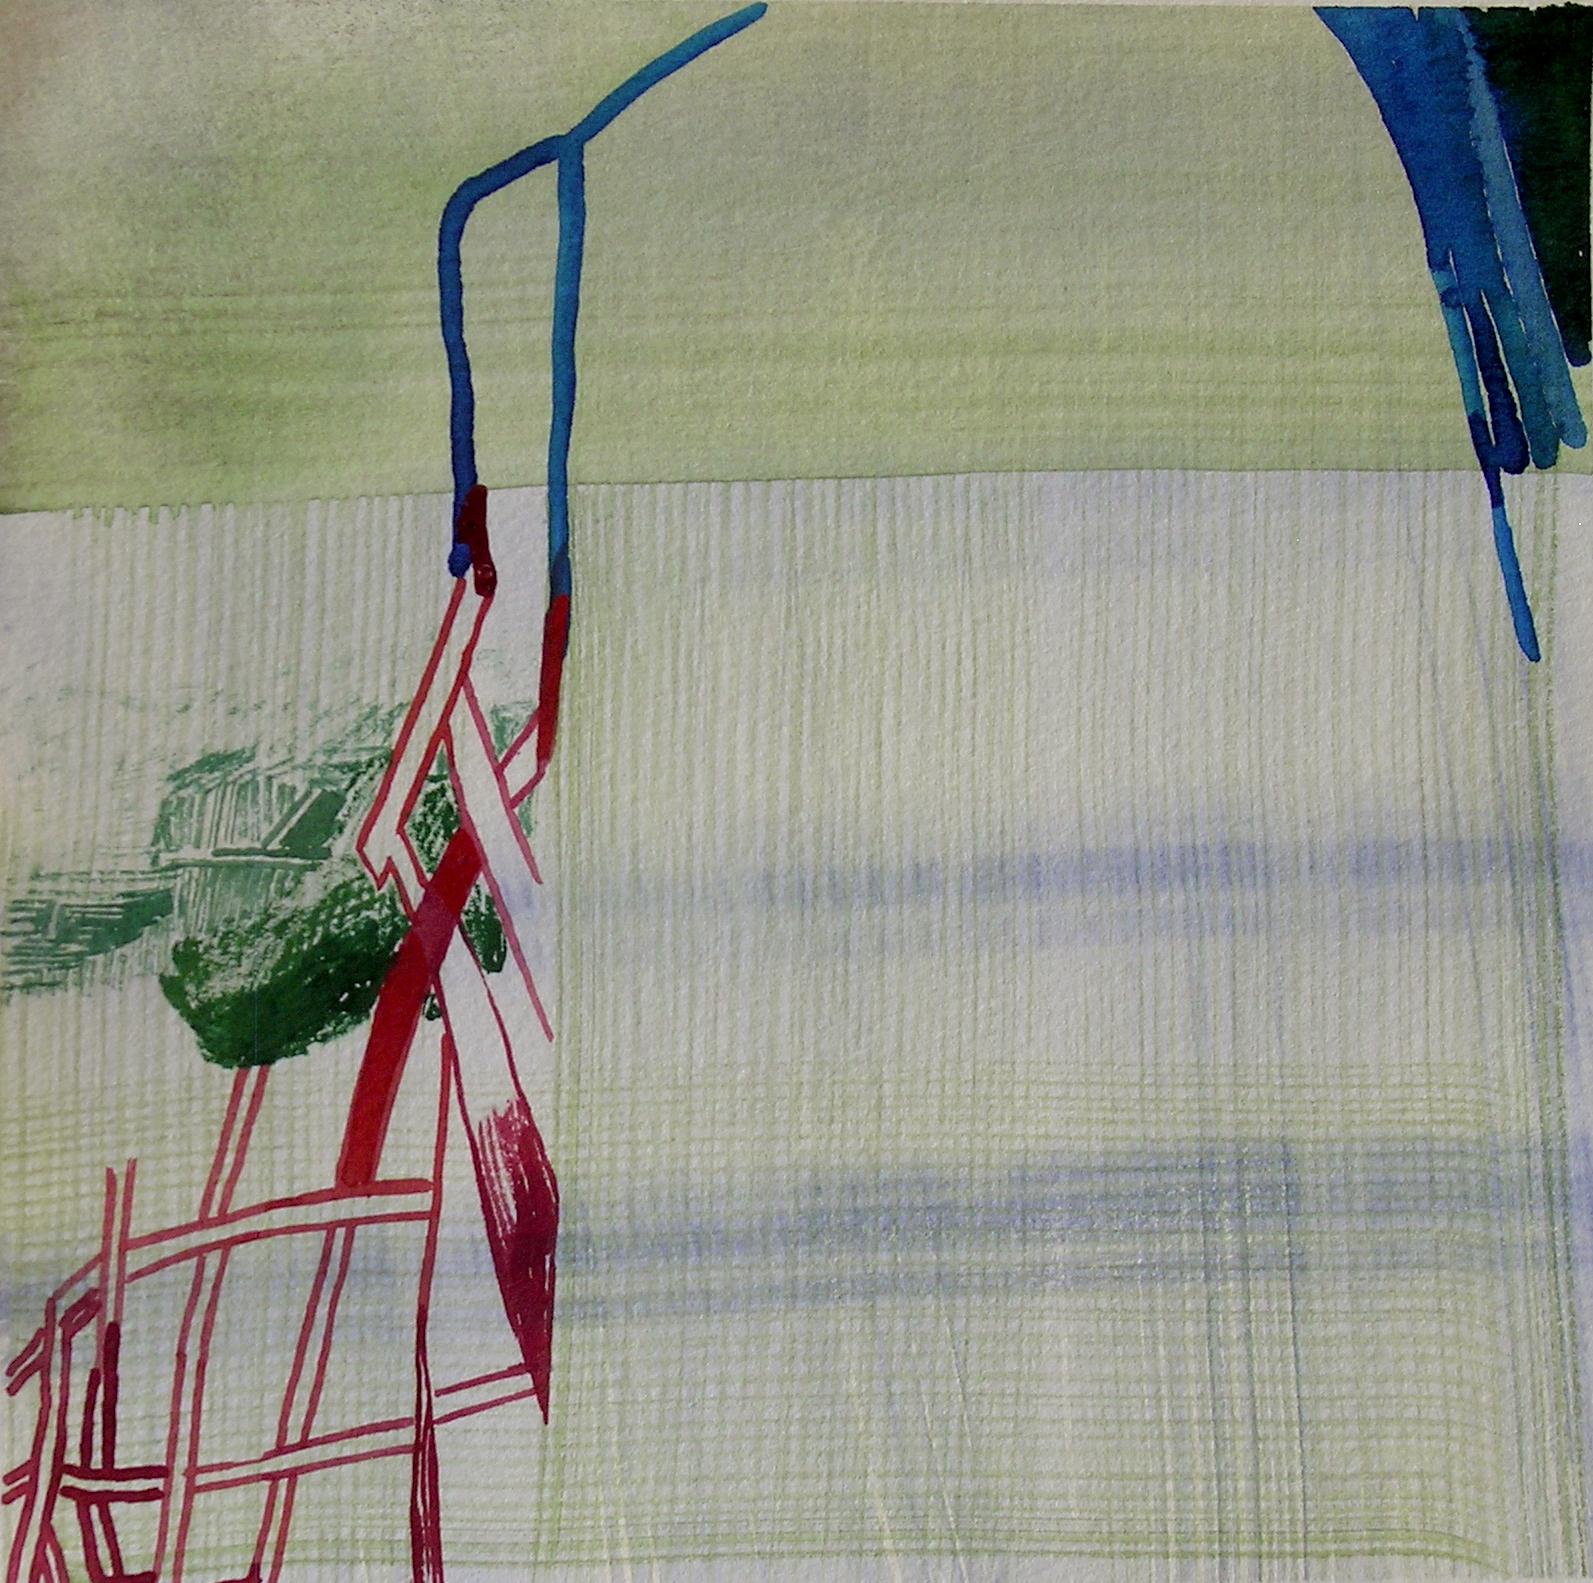 Josette Urso
Silo, 2019
watercolor on paper
6 x 6 in.
(urso211)

This small watercolor on paper features abstract red and blue linear shapes against a background of textured brushstrokes in shades of green, ivory, and blue. It is signed by the